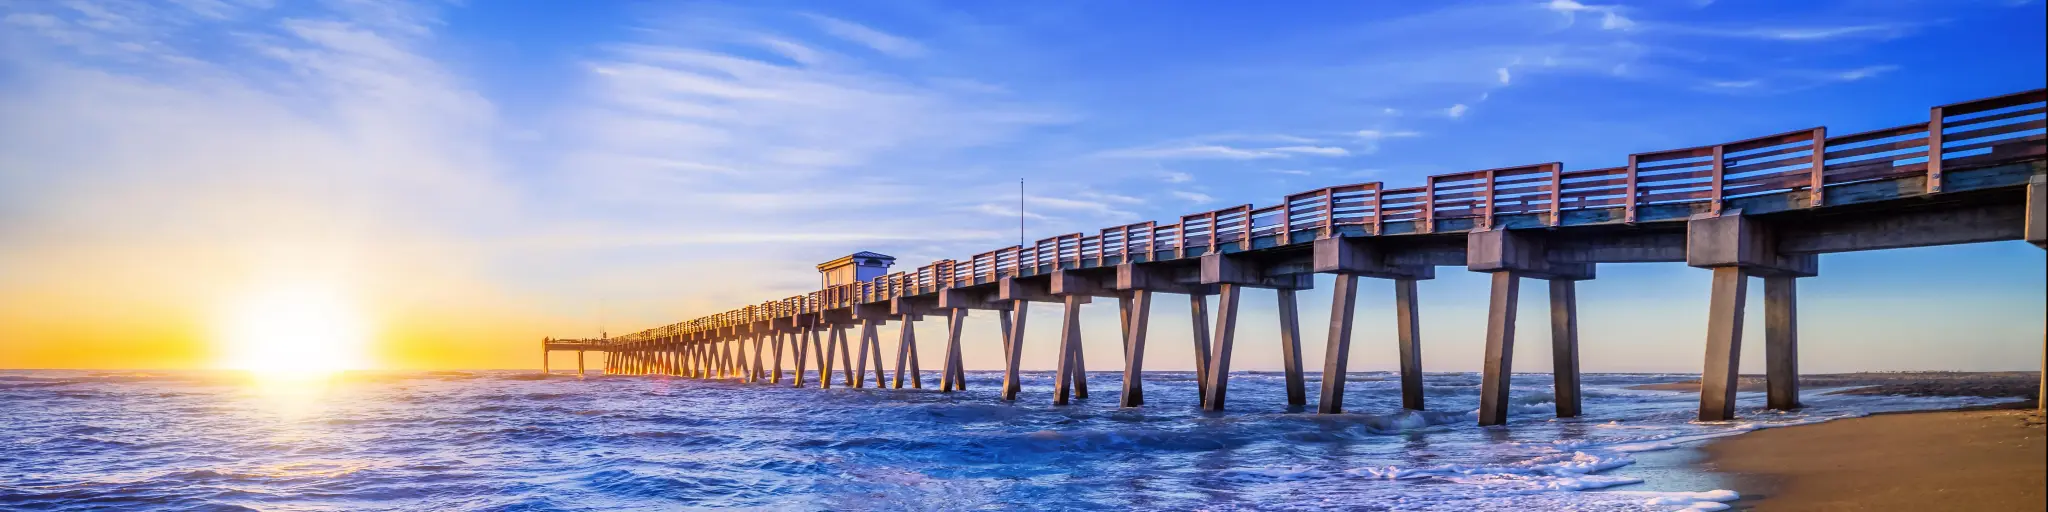 Famous pier of Venice while sunset, Florida